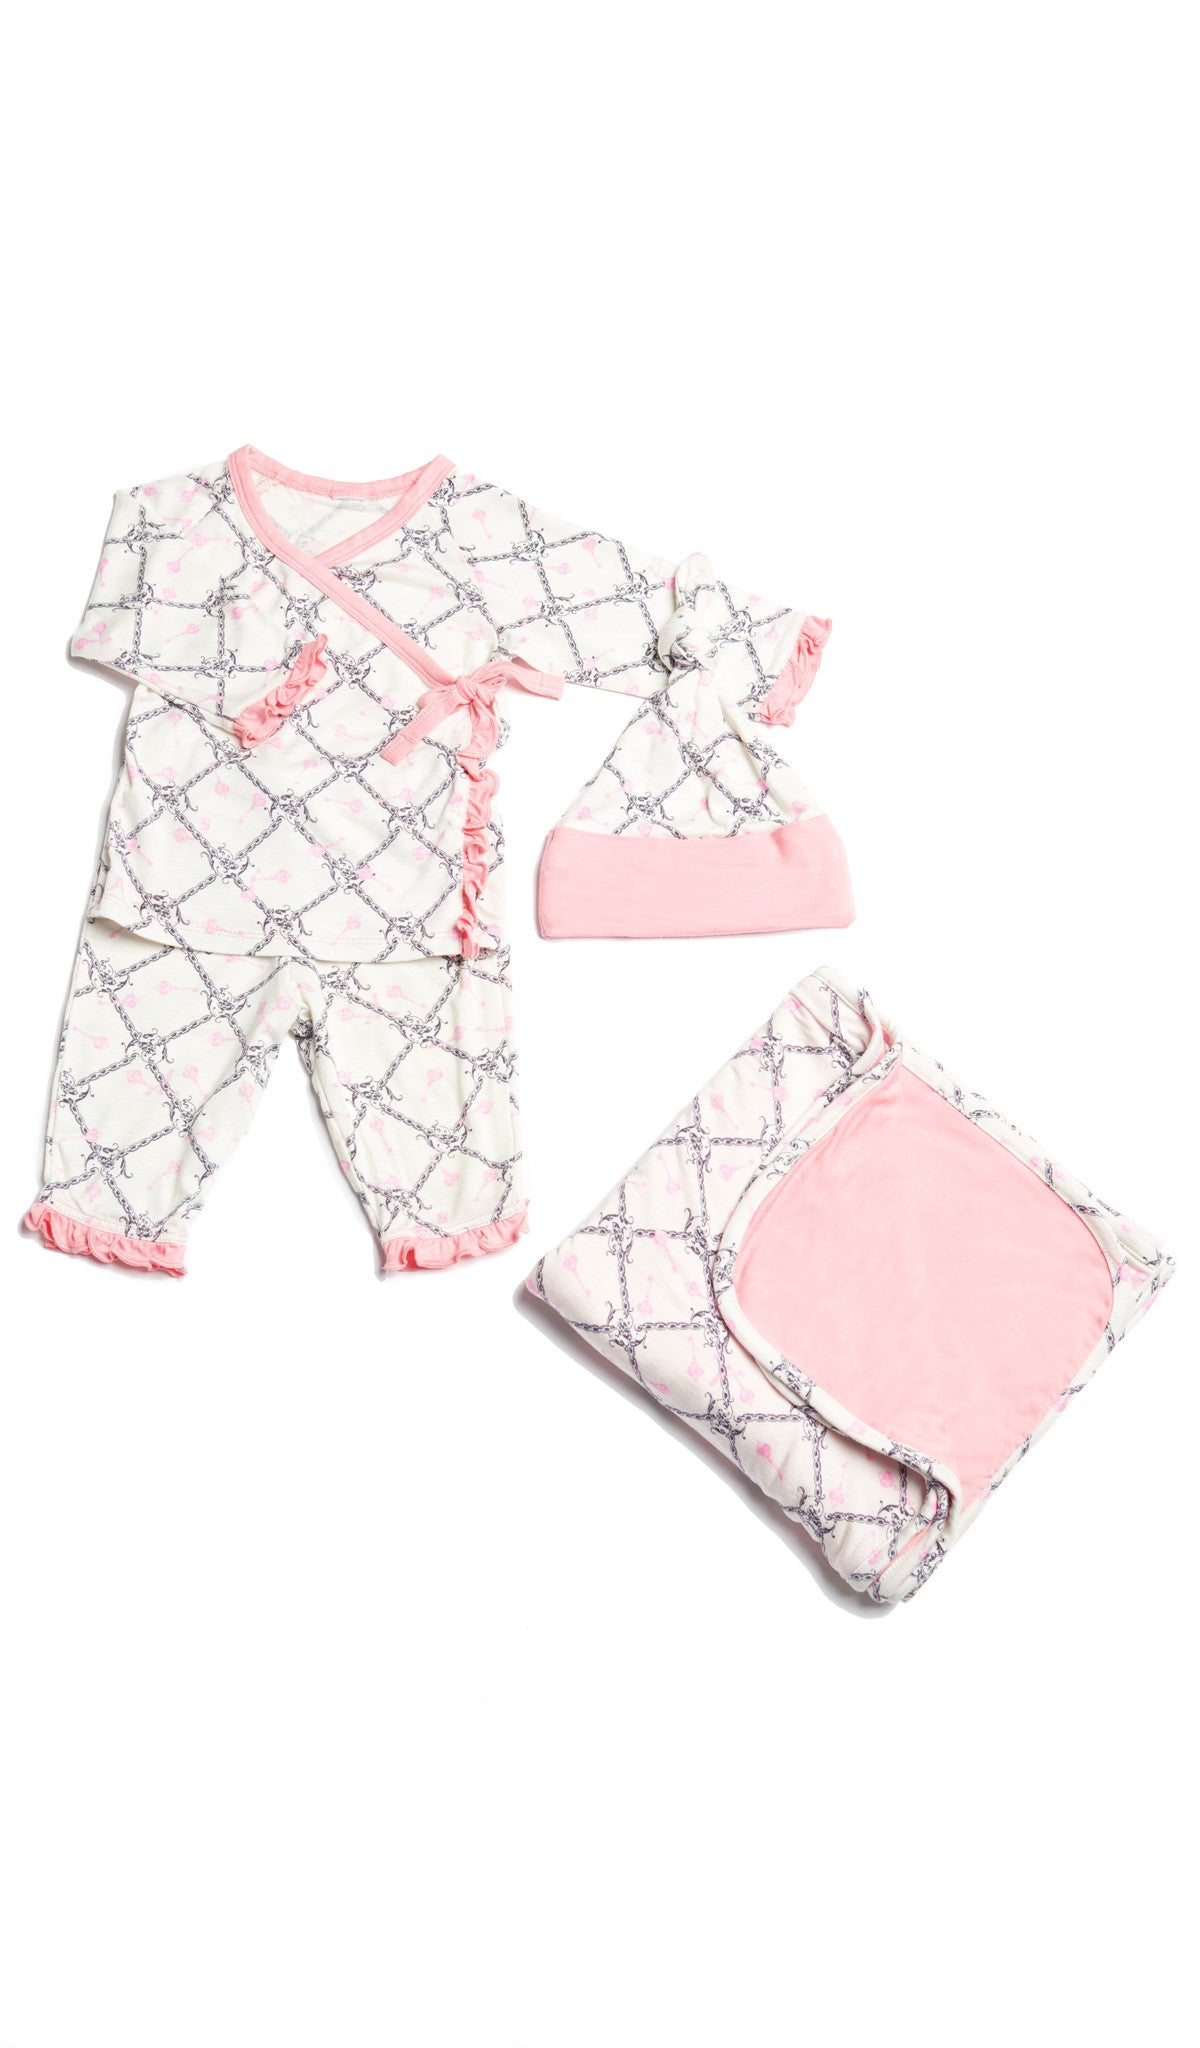 Duchess Baby's Ruffle Take-Me-Home 3 Piece set flat shot showing long sleeve kimono top and pant with ruffle trim, and matching knotted baby hat..  Matching blanket folded into a square is sold separately.